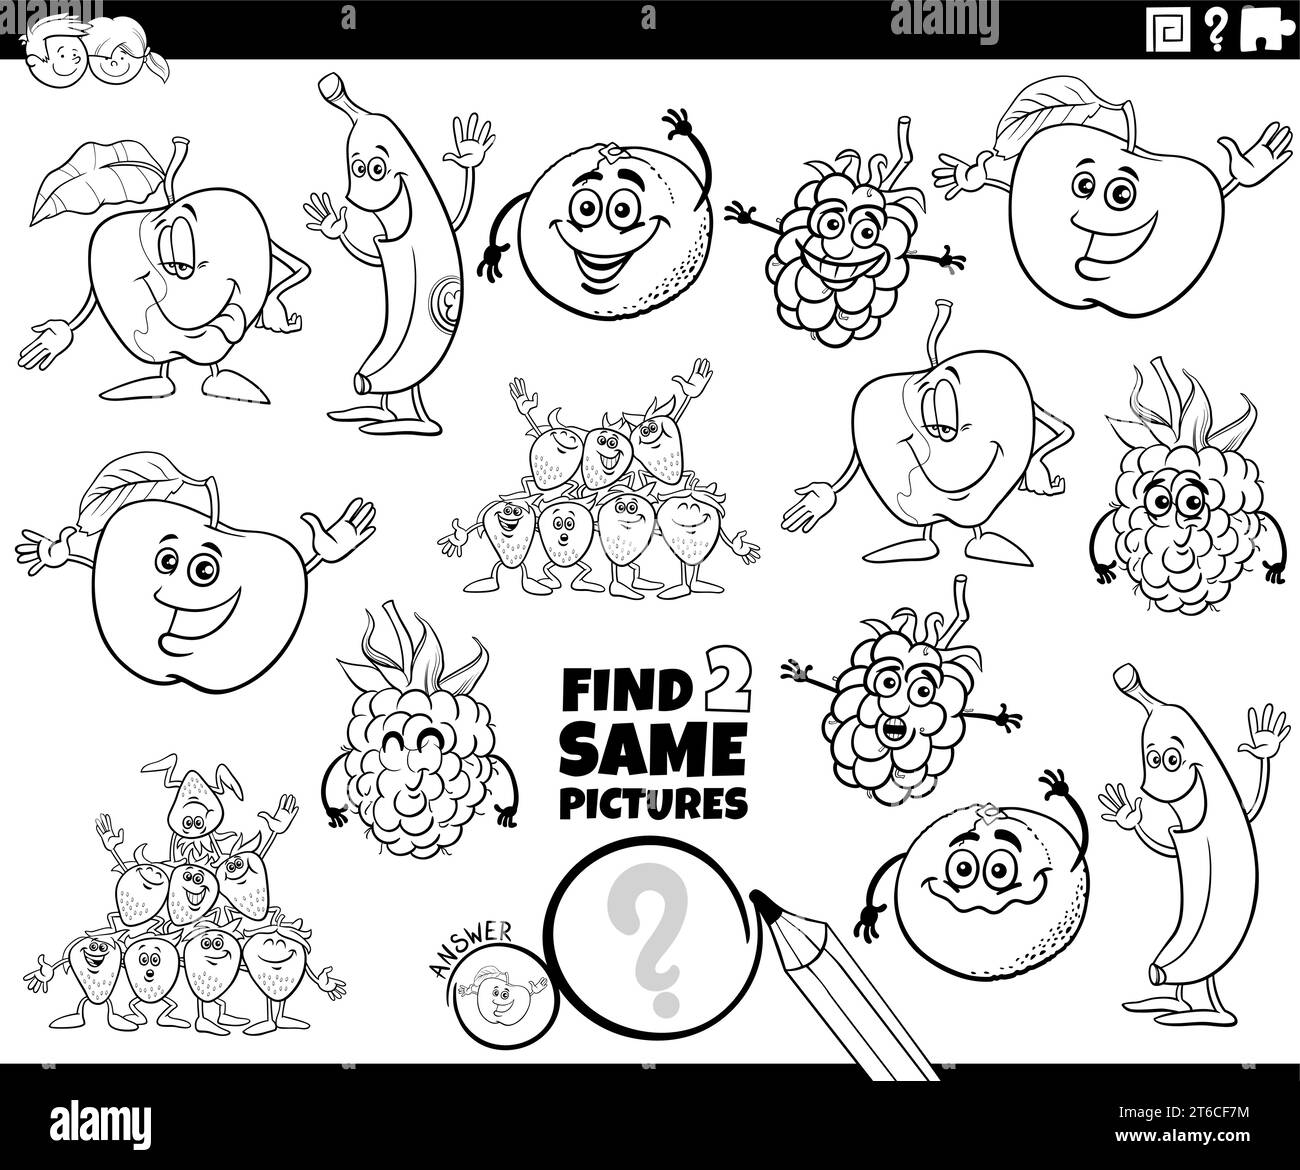 Cartoon illustration of finding two same pictures educational activity with fruit characters coloring page Stock Vector